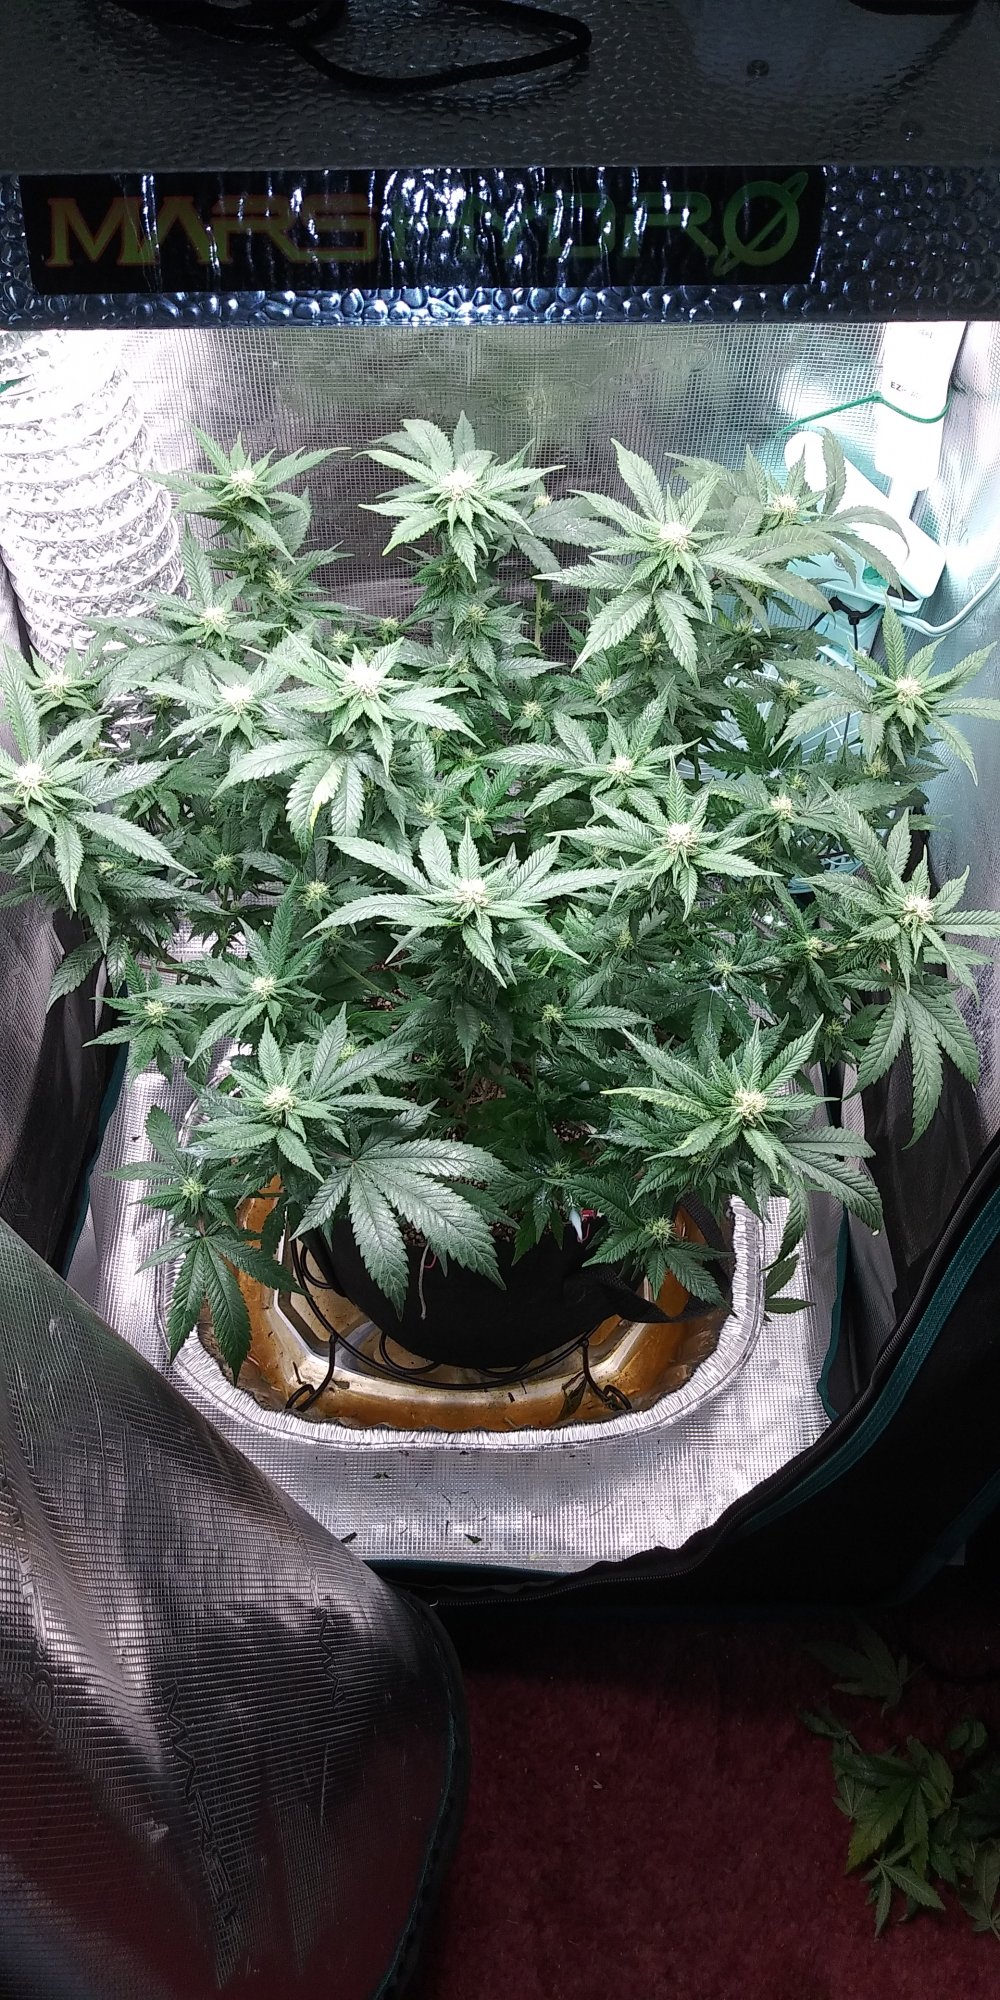 First time doing lst looking good so far